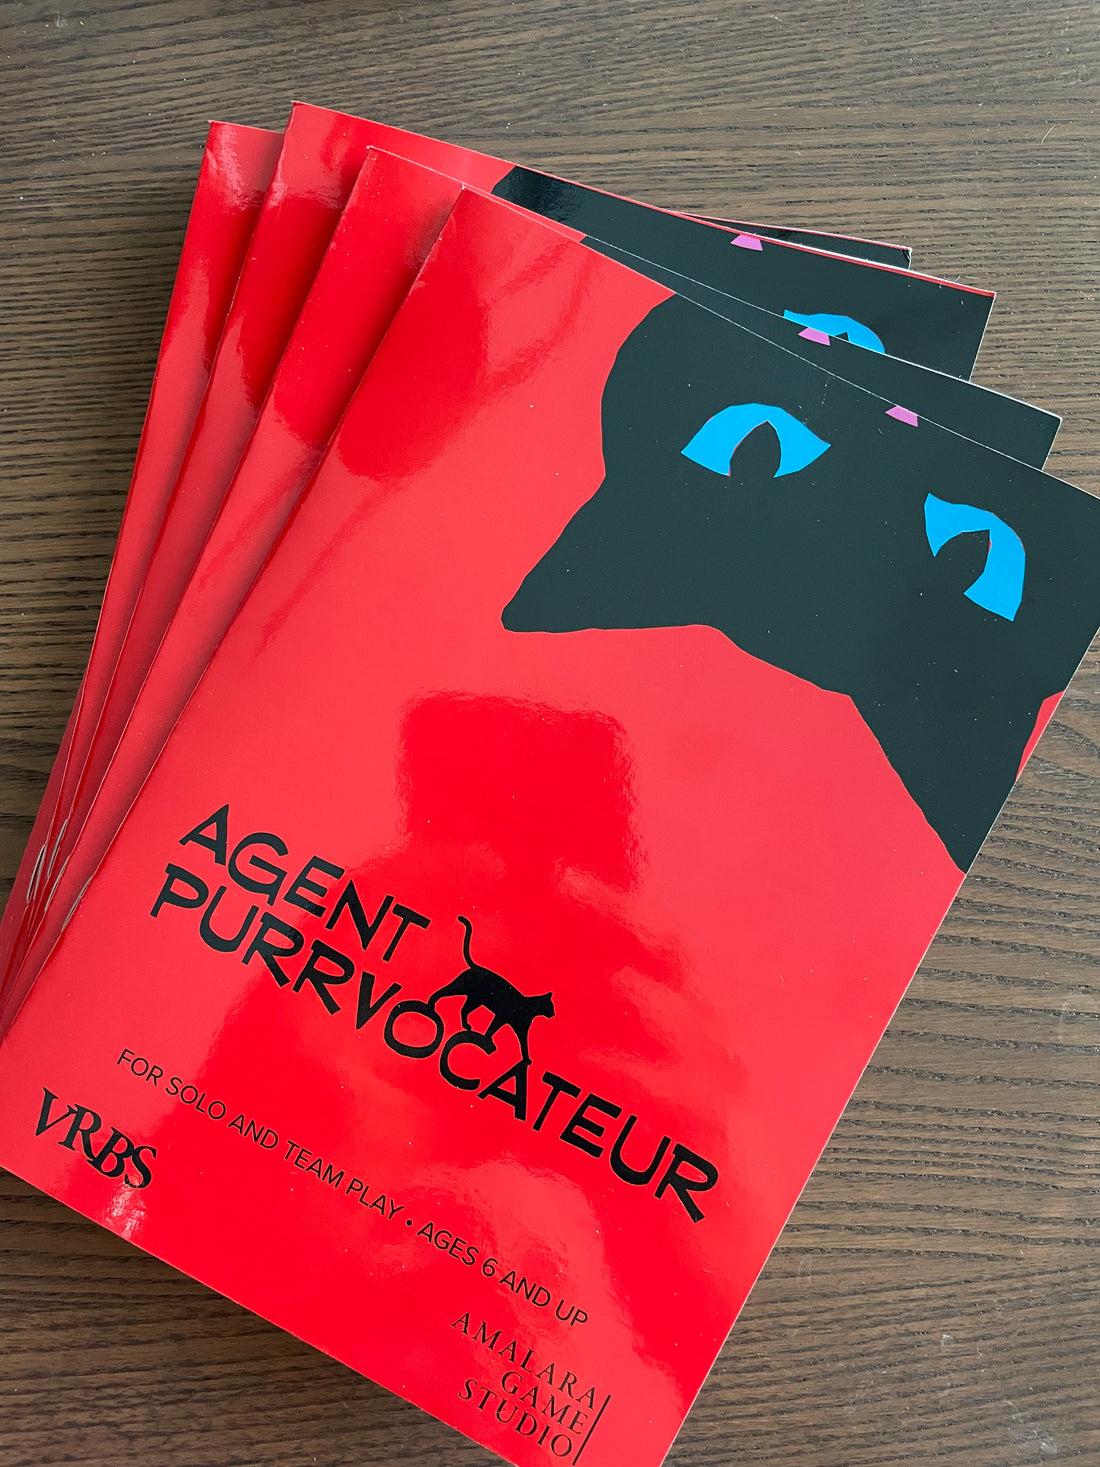 Print version of Agent Purrvocateur now in stock!